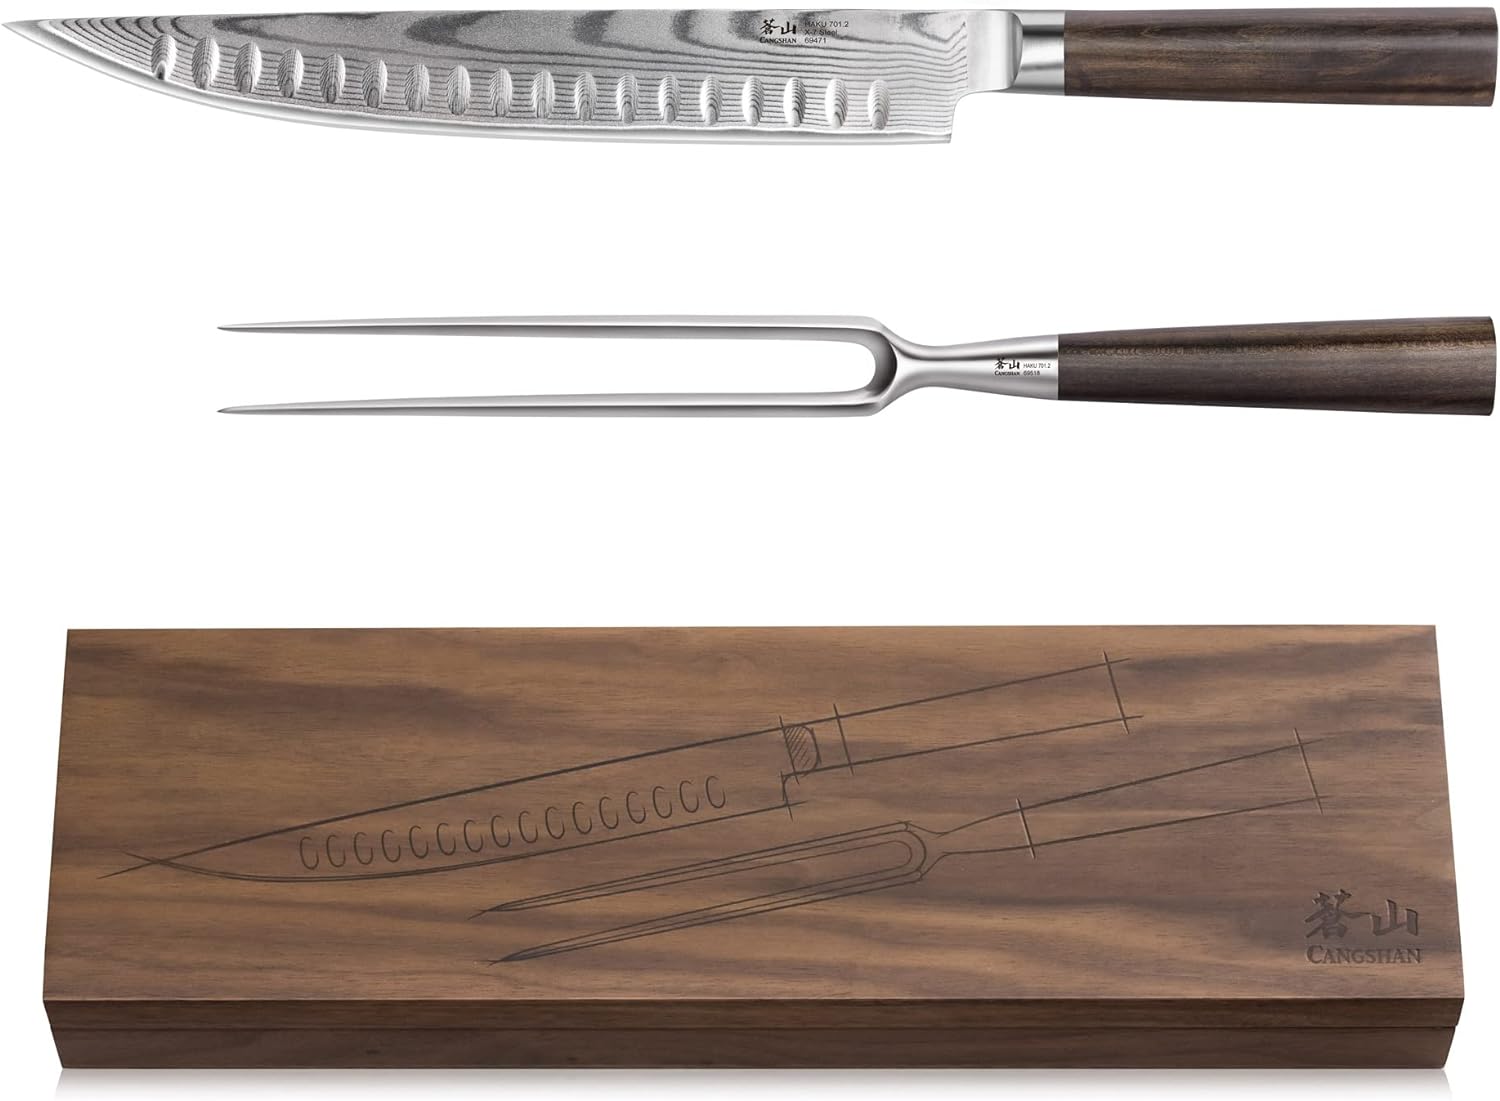 Cangshan HAKU Series 501158 X-7 Damascus Steel Forged 2-Piece Carving Set with Walnut Box